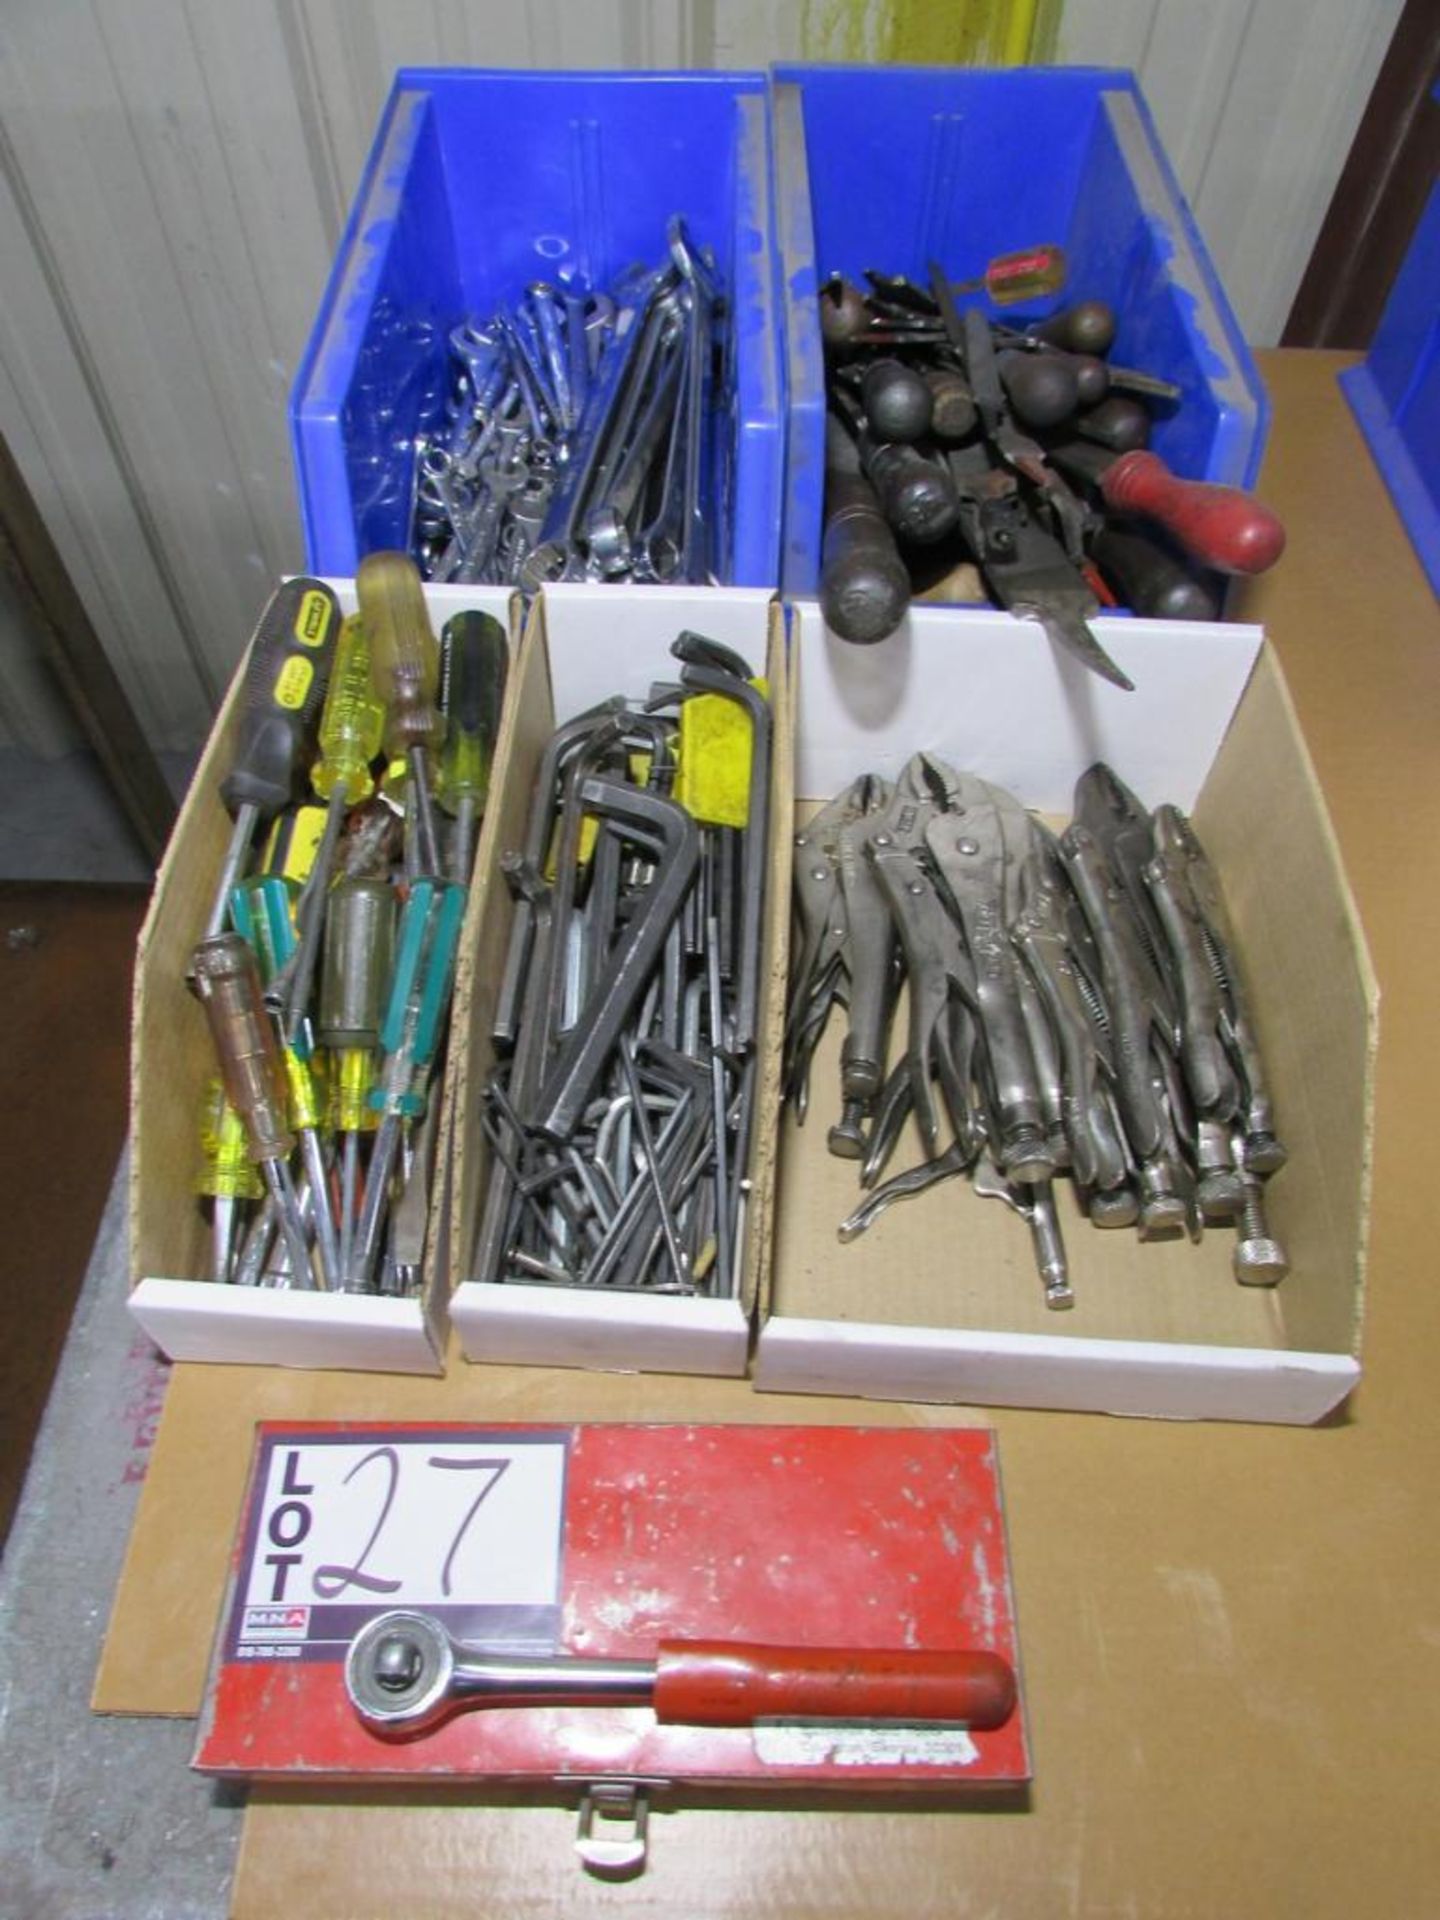 Assorted Hand Tools: Wrenches, Drivers, Files, Allen Wrenches, Ratchet, Vice Grips, and Socket Set